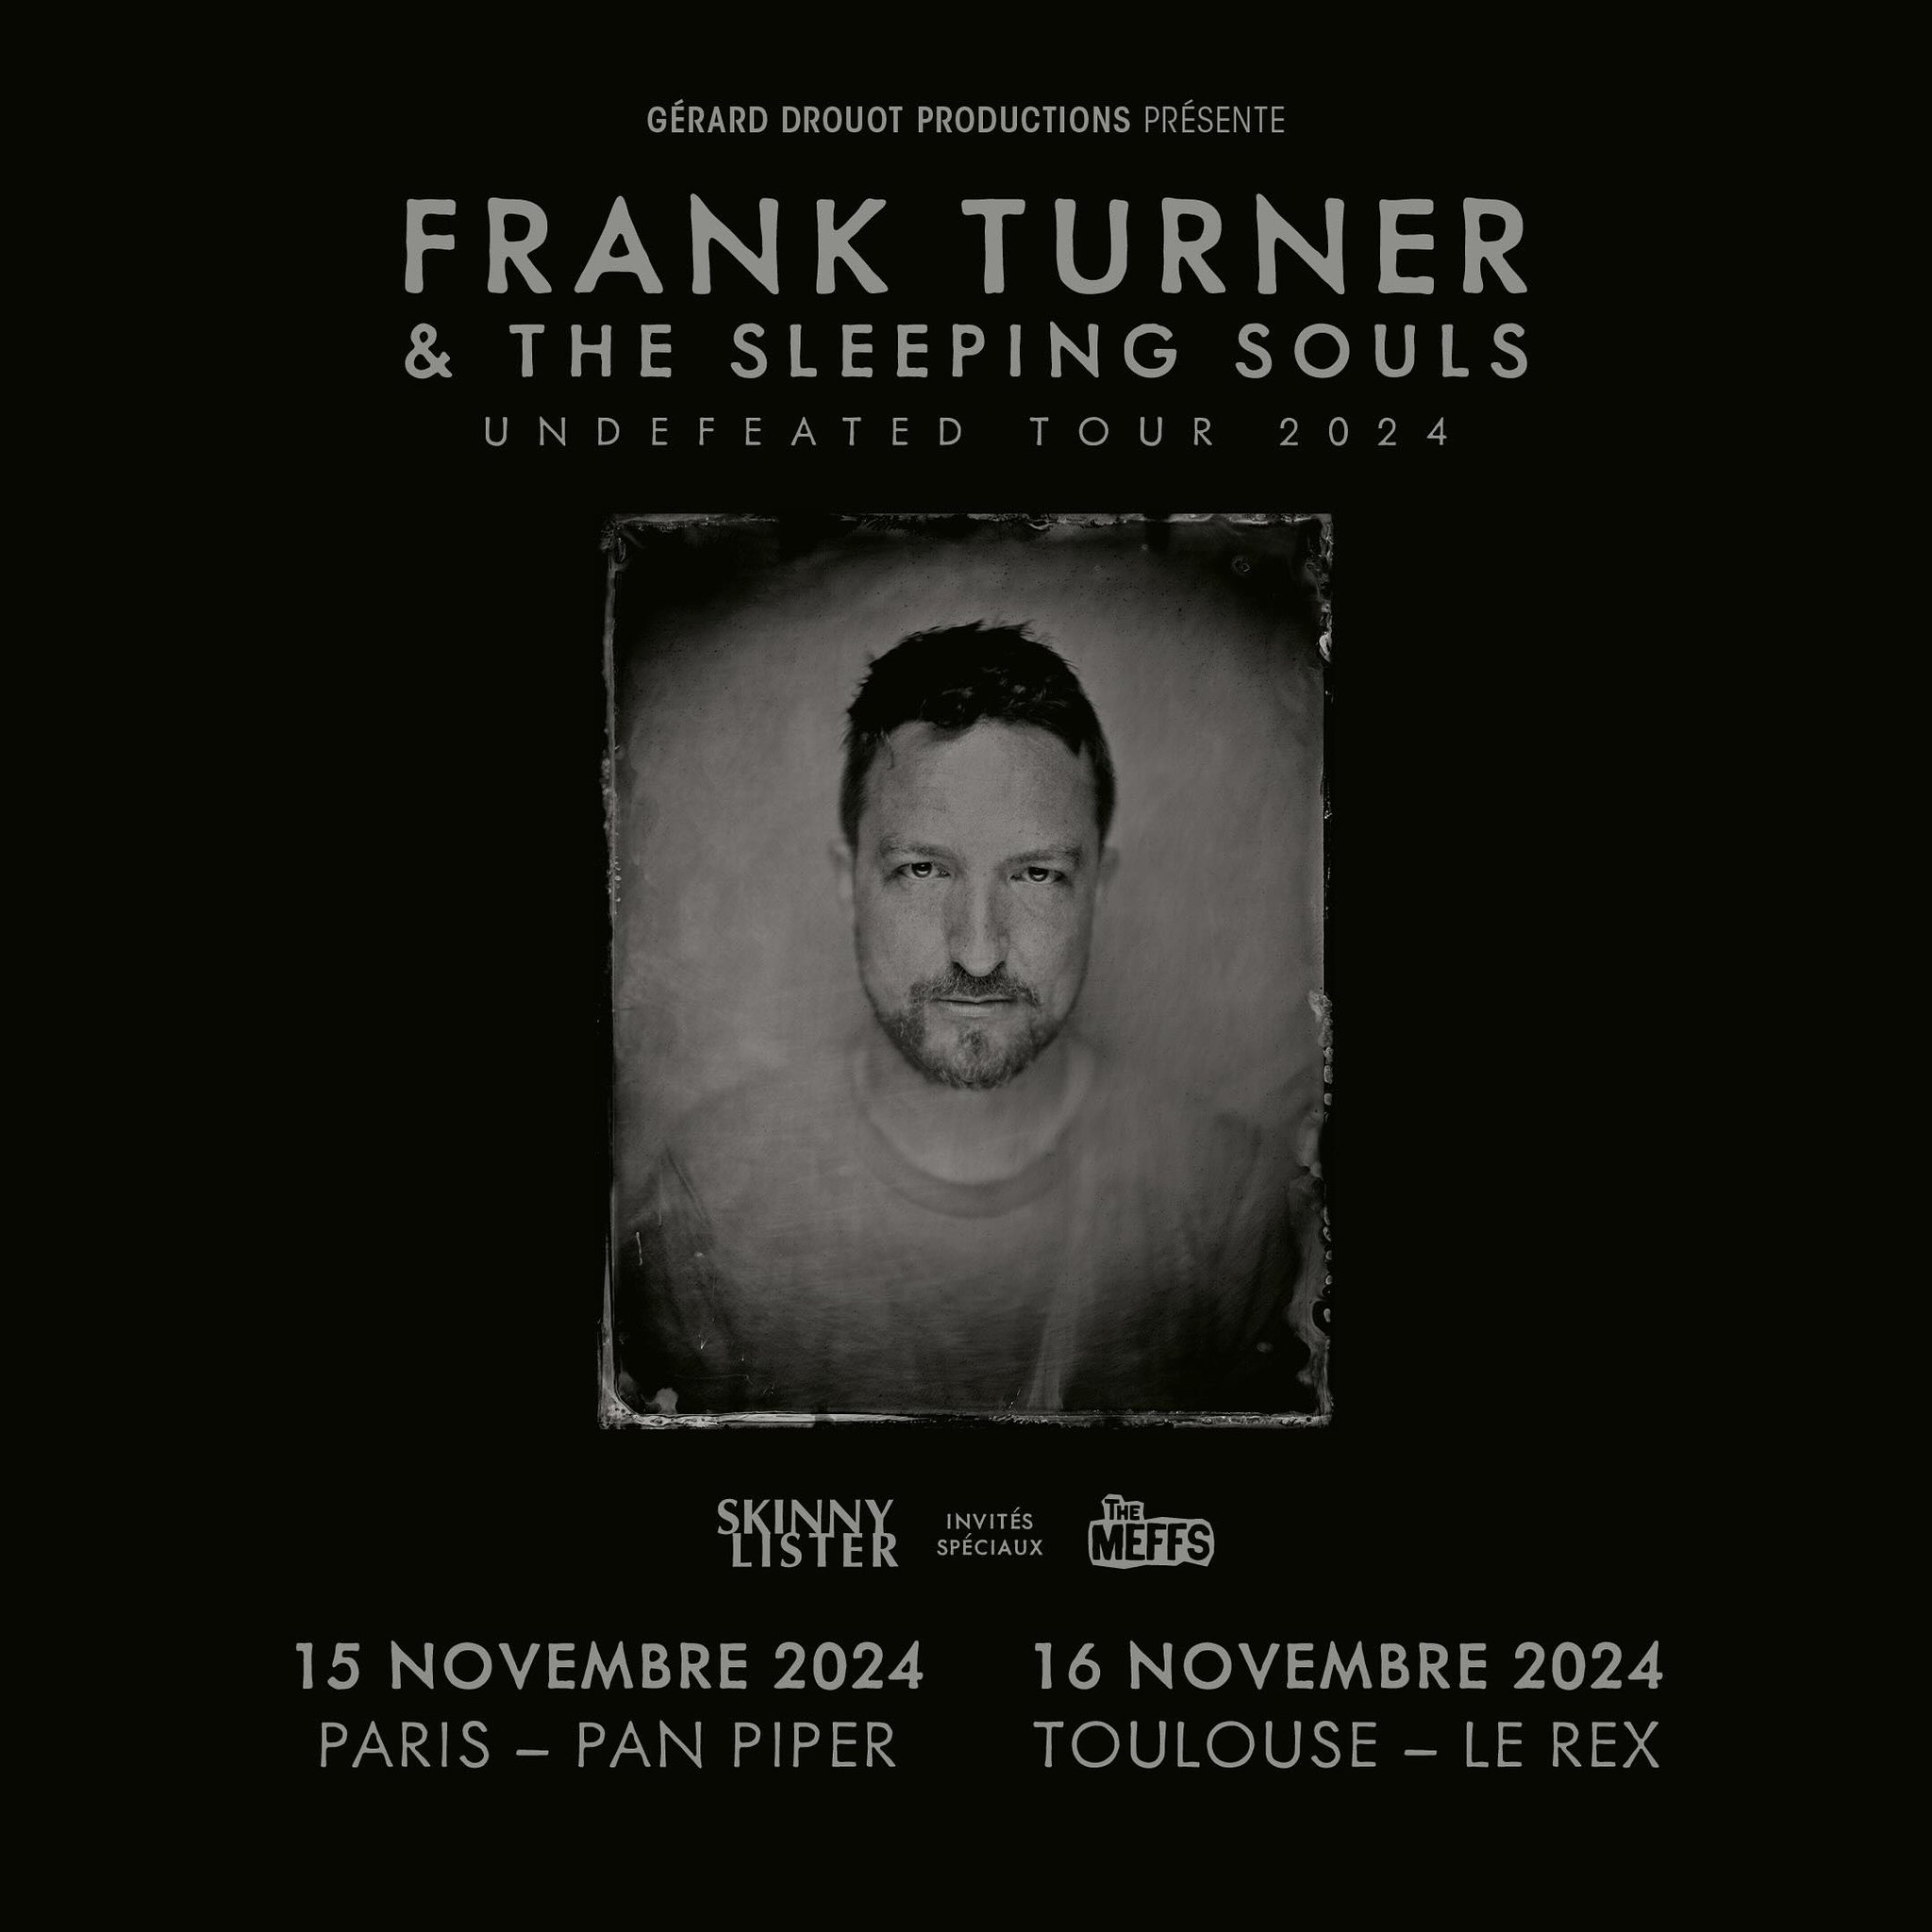 Billets Frank Turner and The Sleeping Souls (Le Rex de Toulouse - Toulouse)